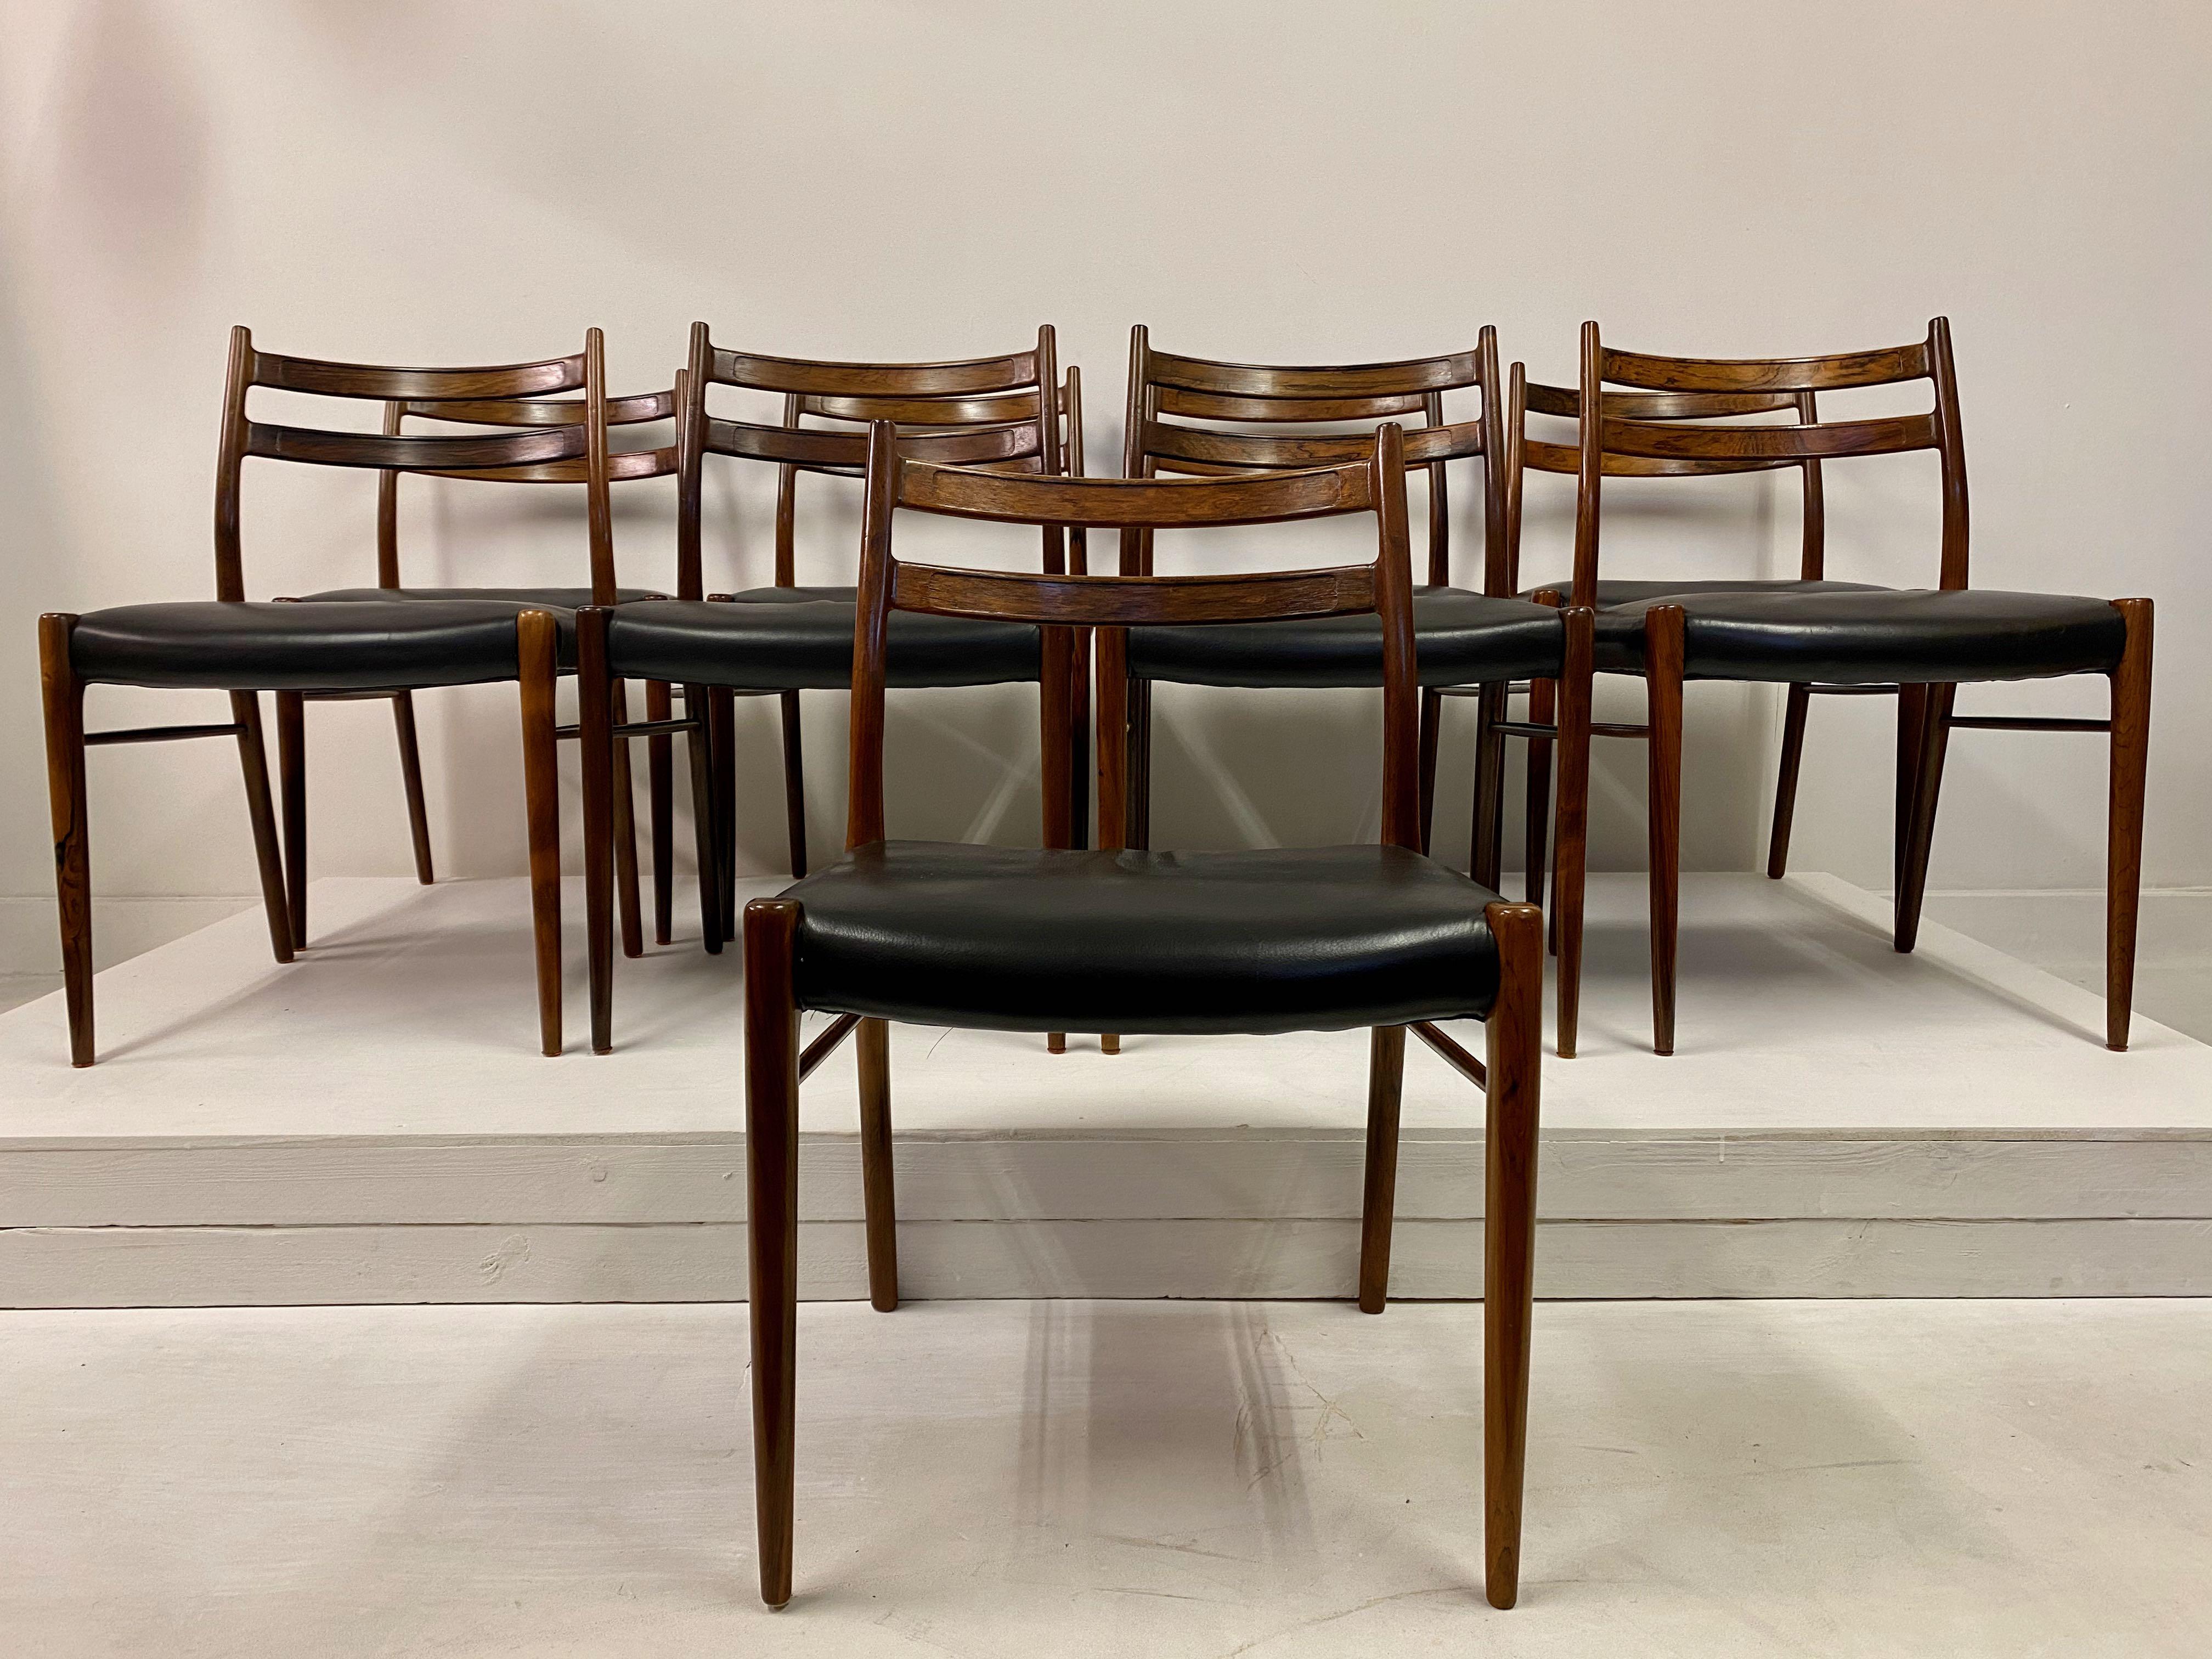 1960s Danish Rosewood Dining Chairs, Danish Rosewood Dining Chairs Uk